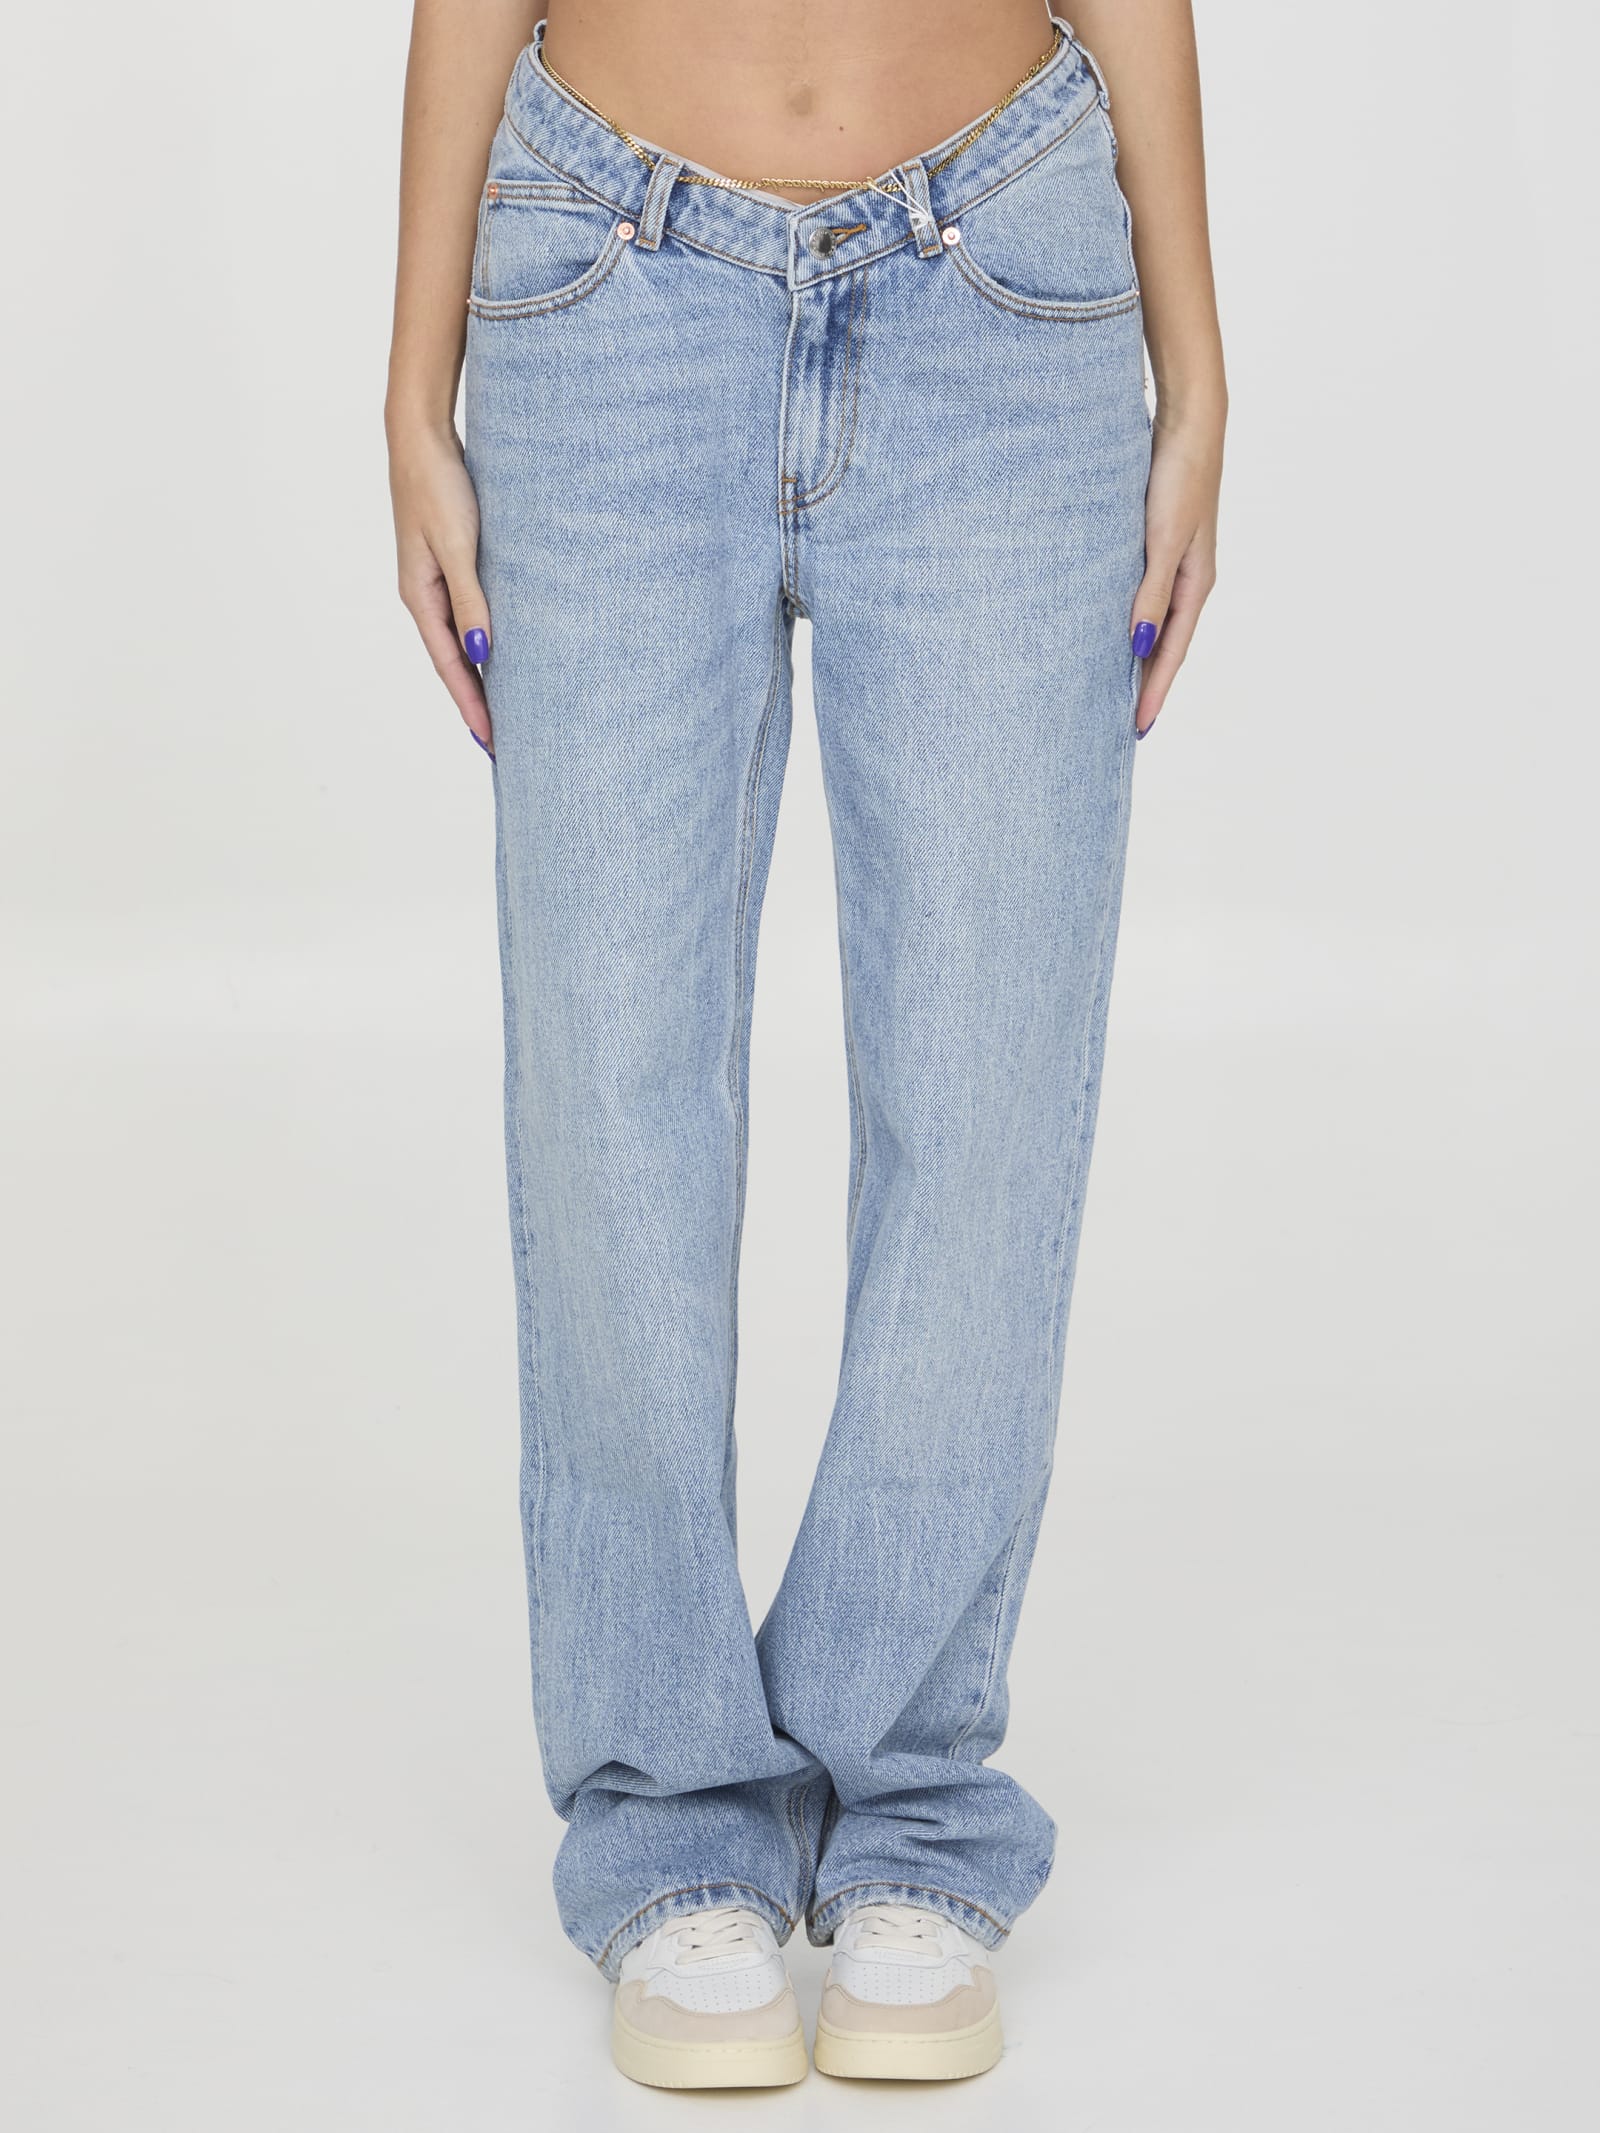 Alexander Wang Denim Jeans With Nameplate